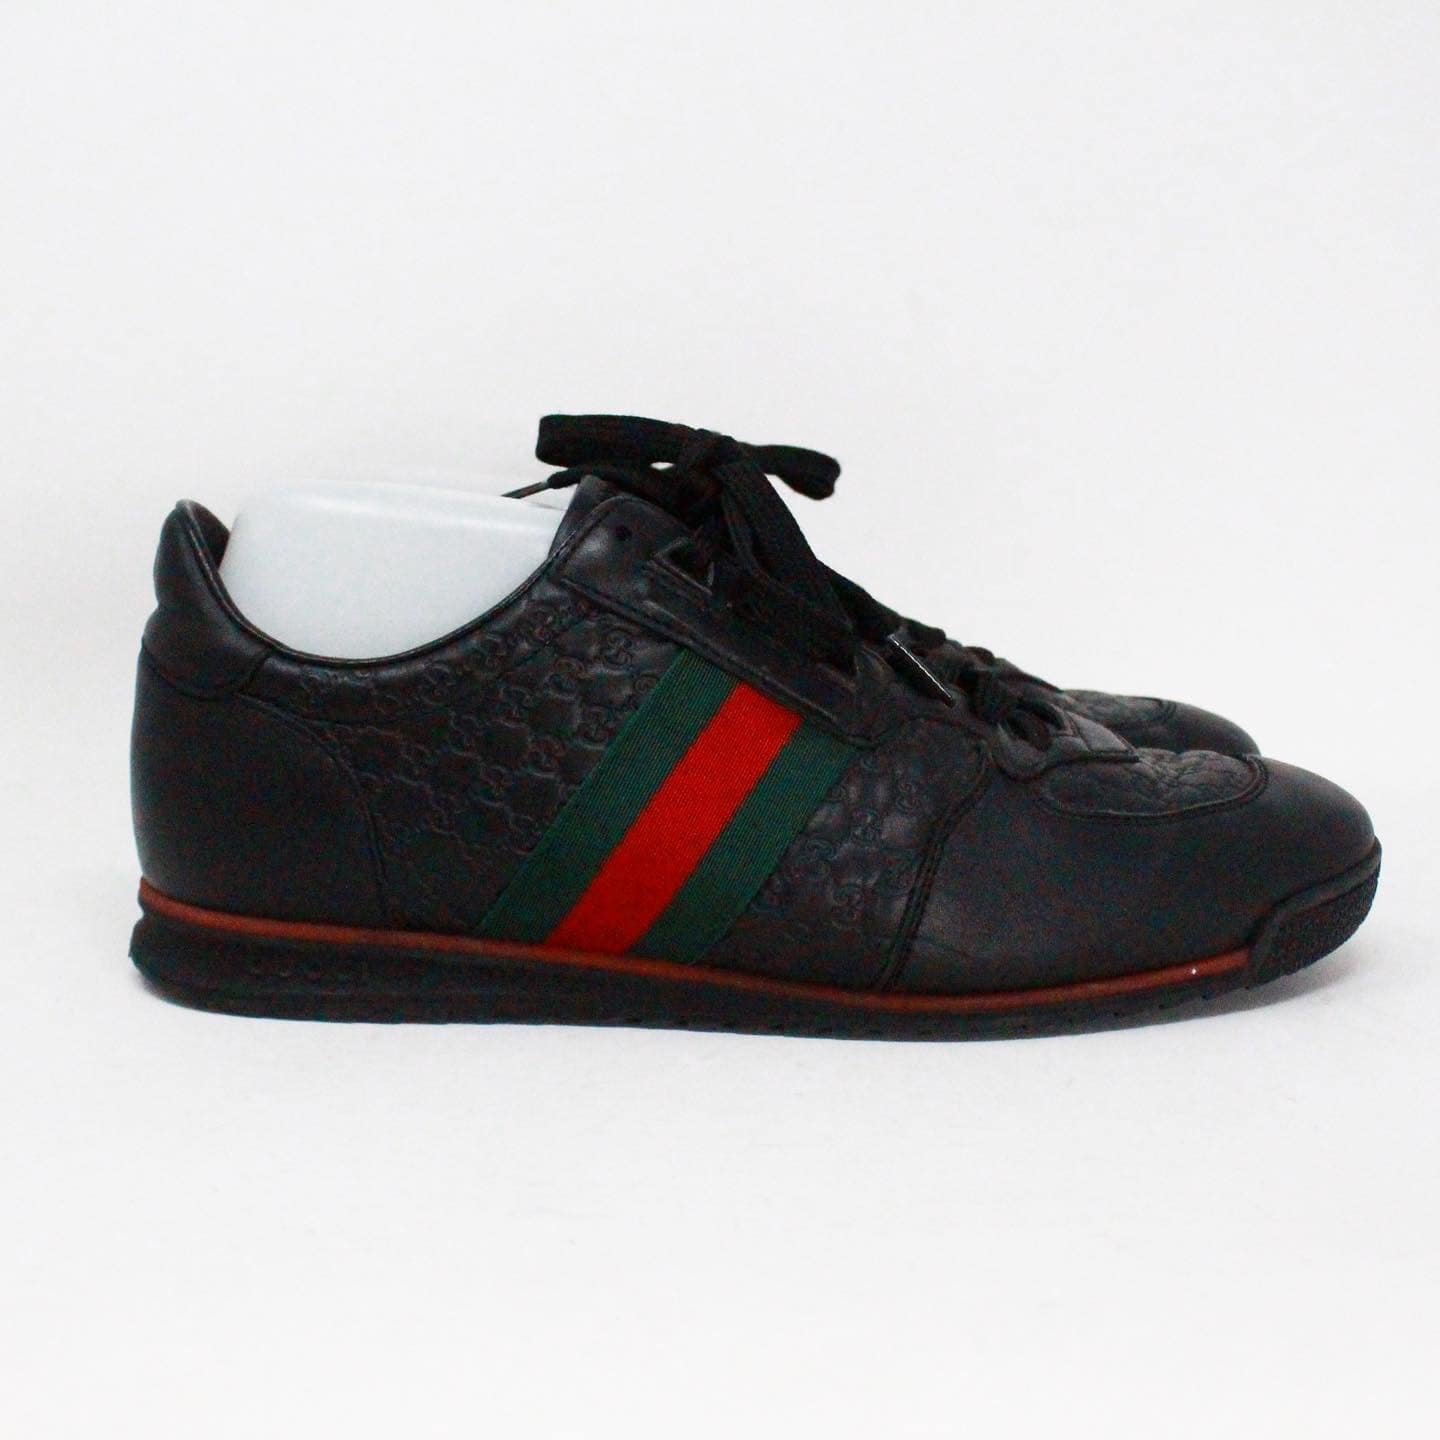 GUCCI 40281 Black Leather GG Embossed Sneakers US 7.5 EU 37.5 2